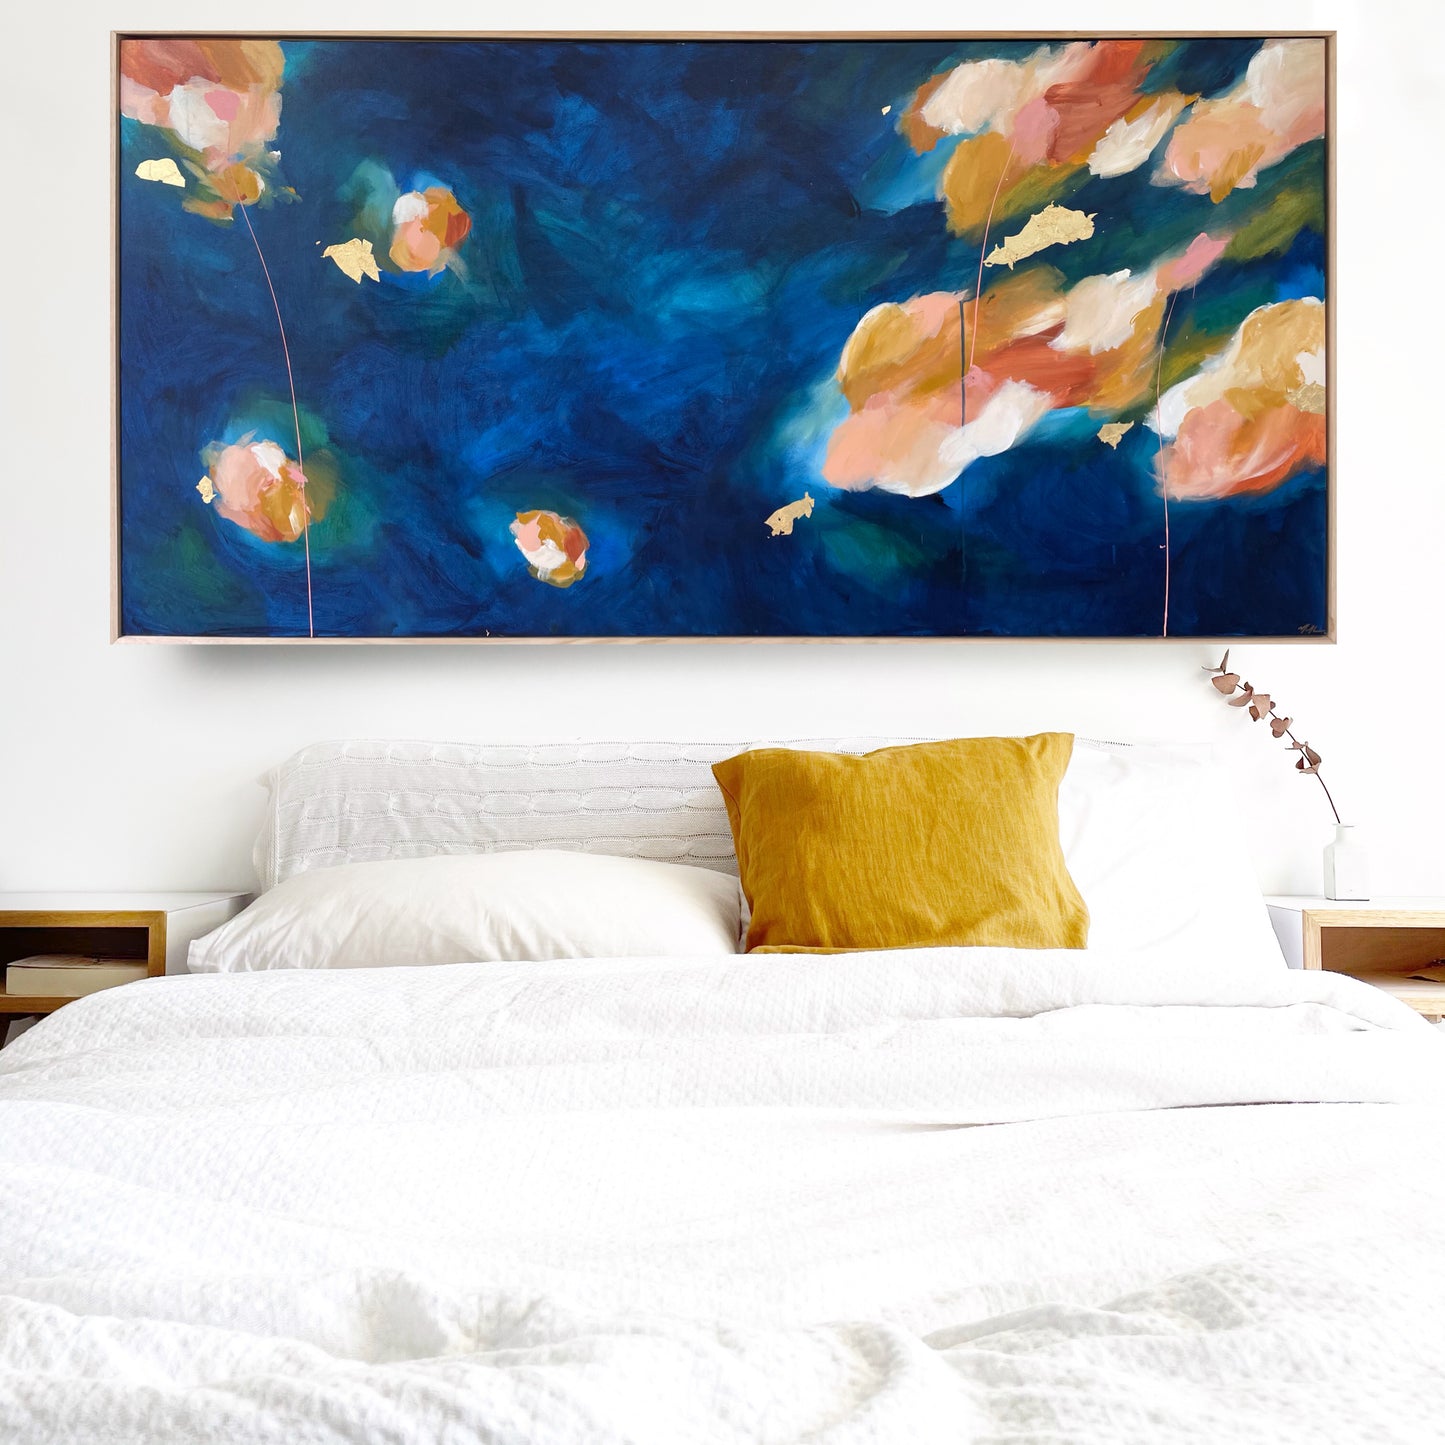 Large abstract art on a budget by McKnight